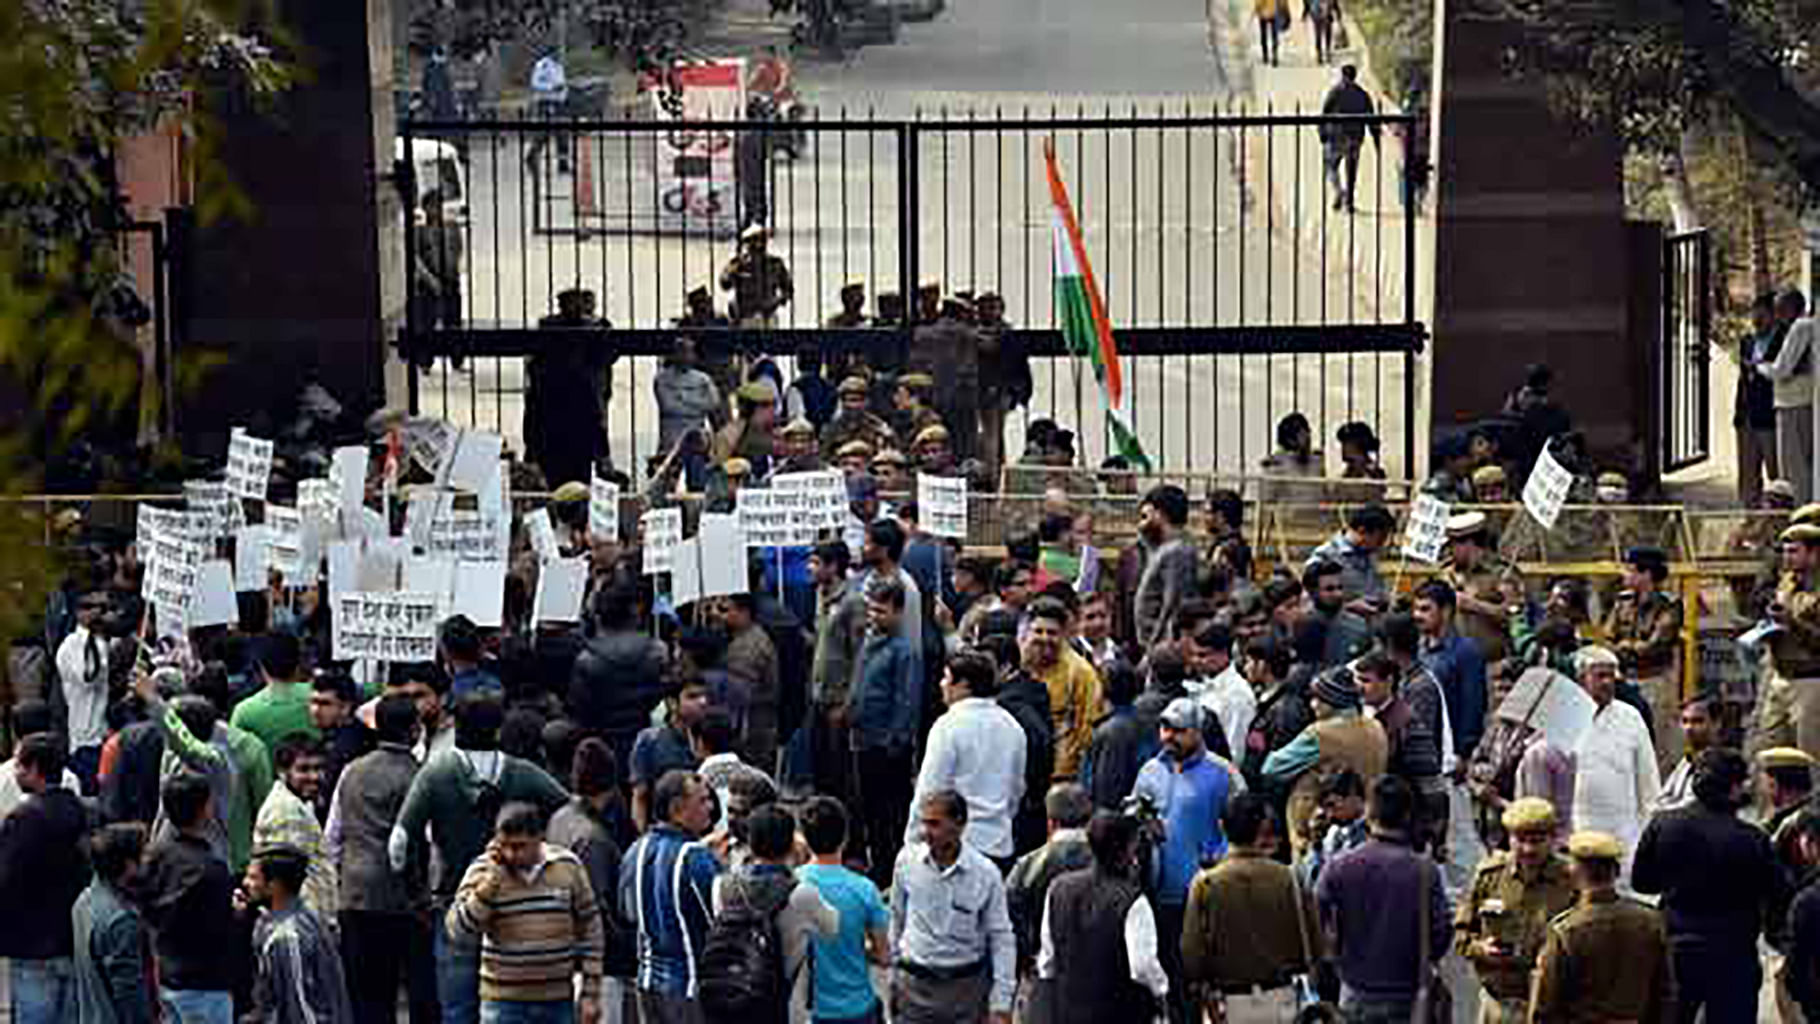 Fracas over Jawaharlal Nehru University issue continues. (Photo: PTI)